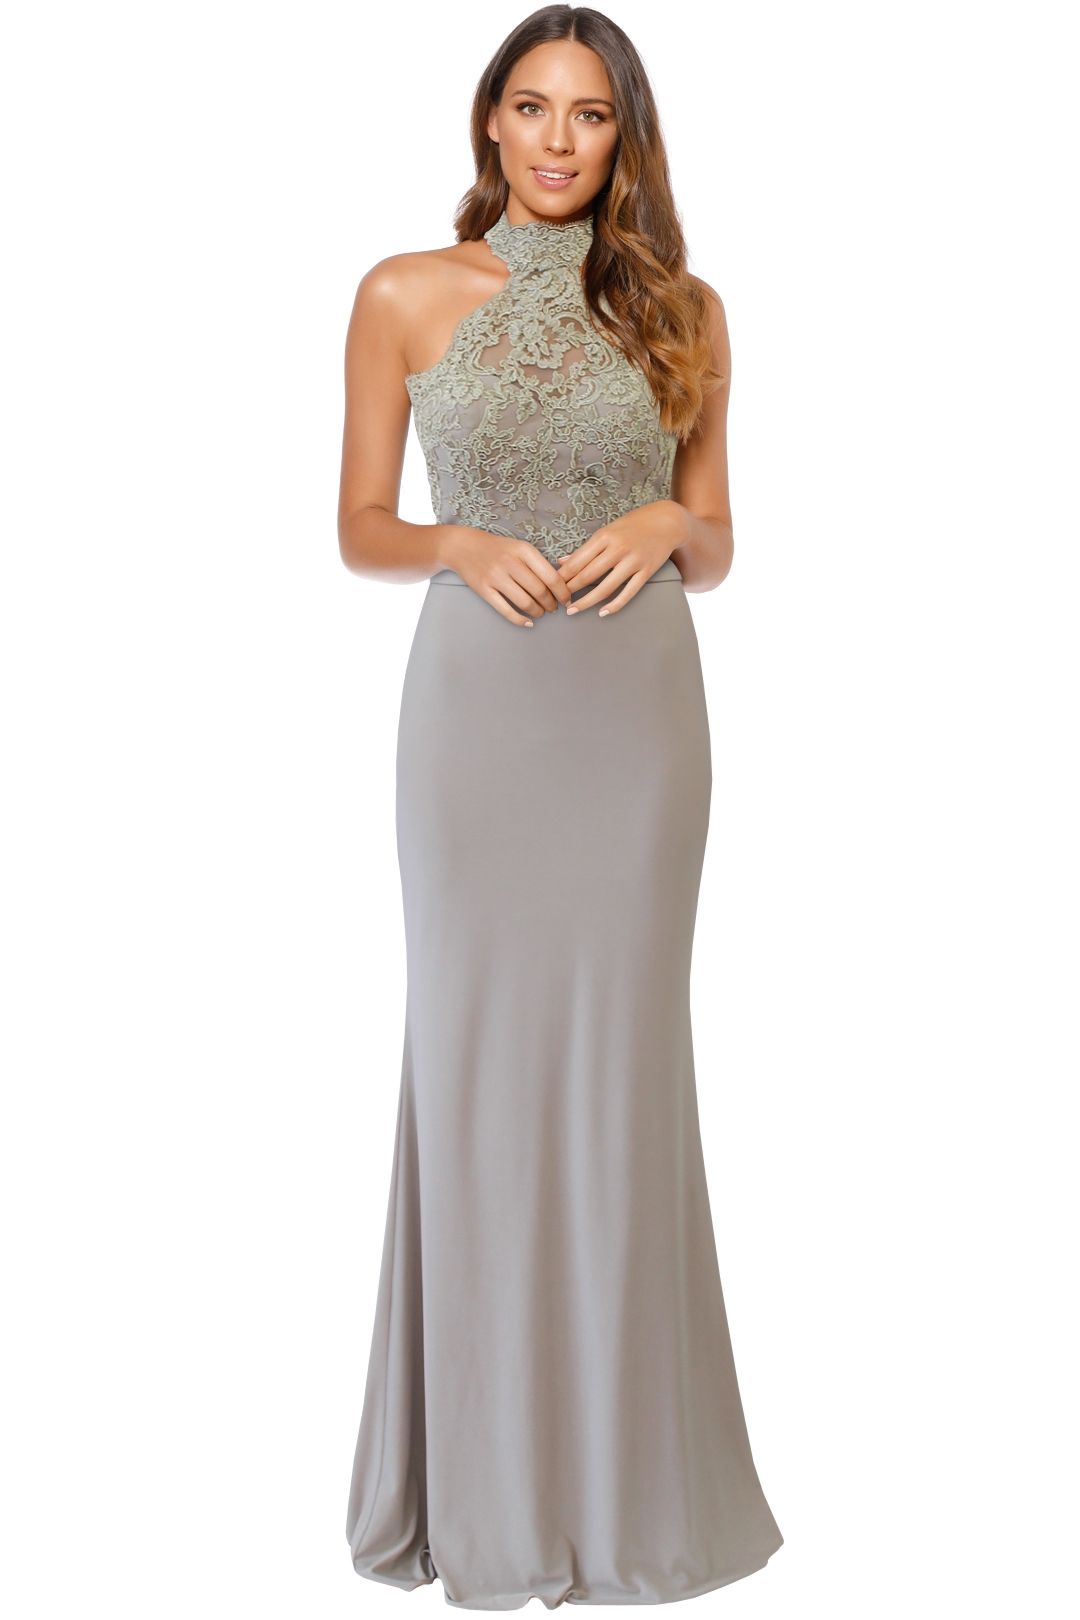 Tinaholy - Lana High Neck Gown - Sand - Front